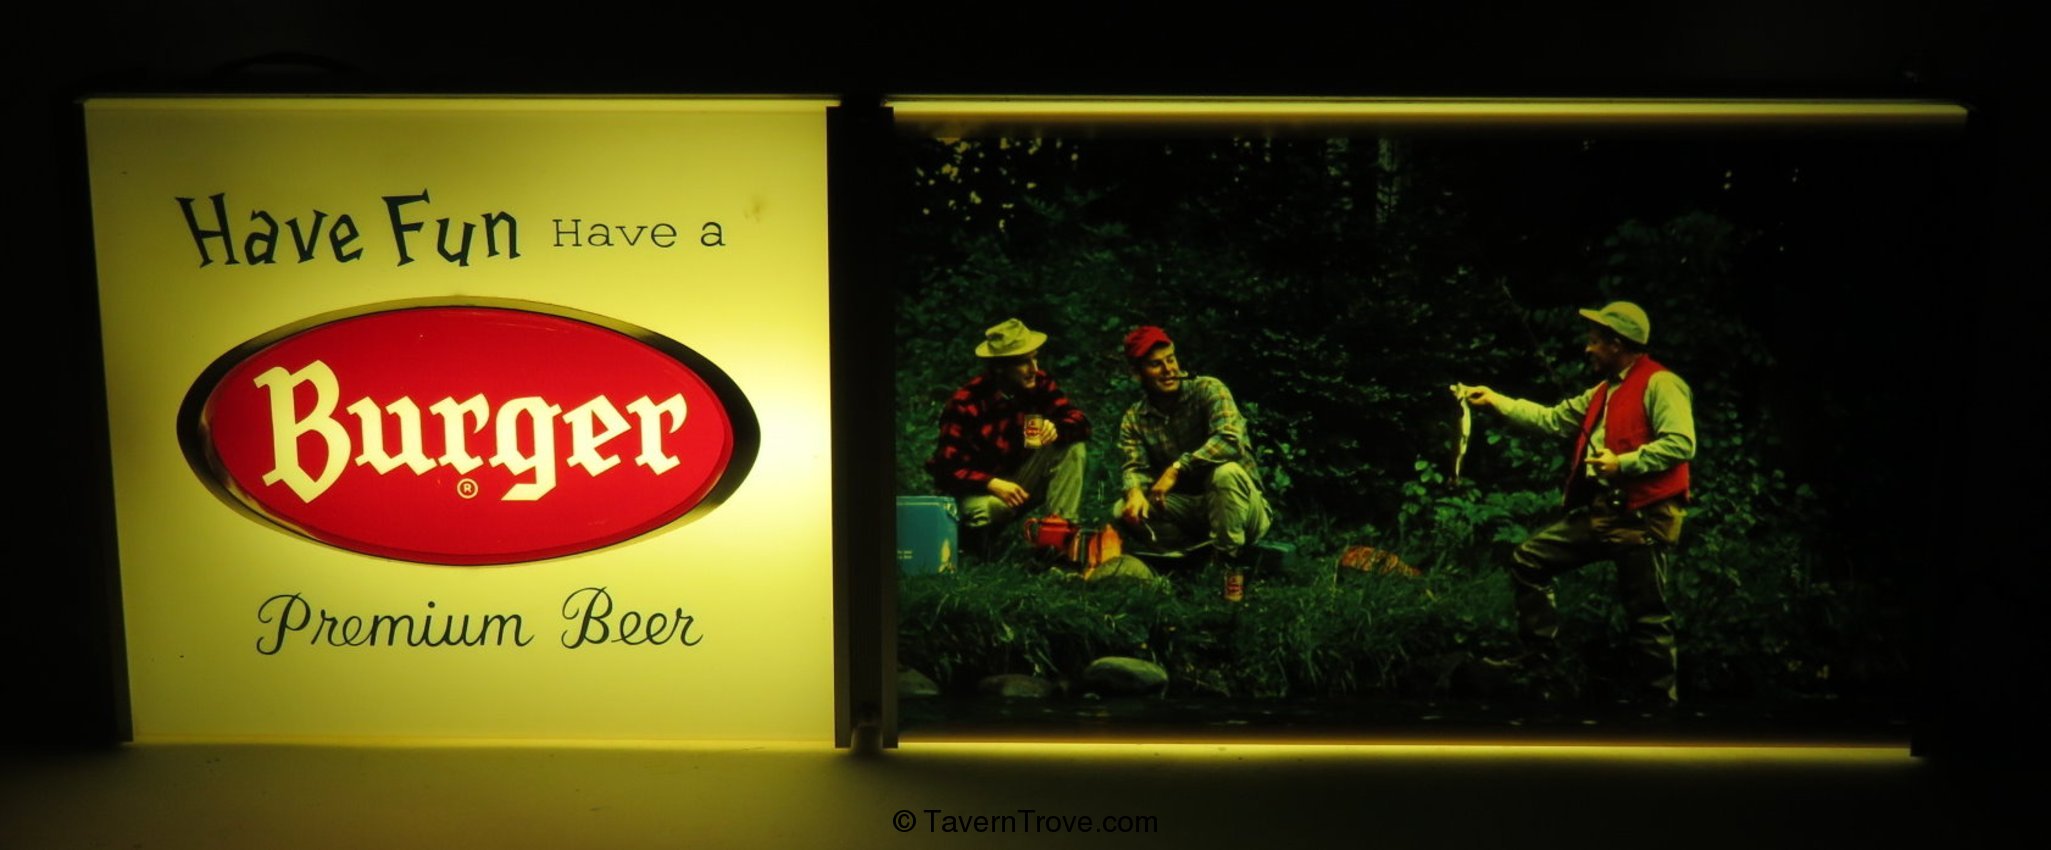 Burger Beer Camping Lighted Sign